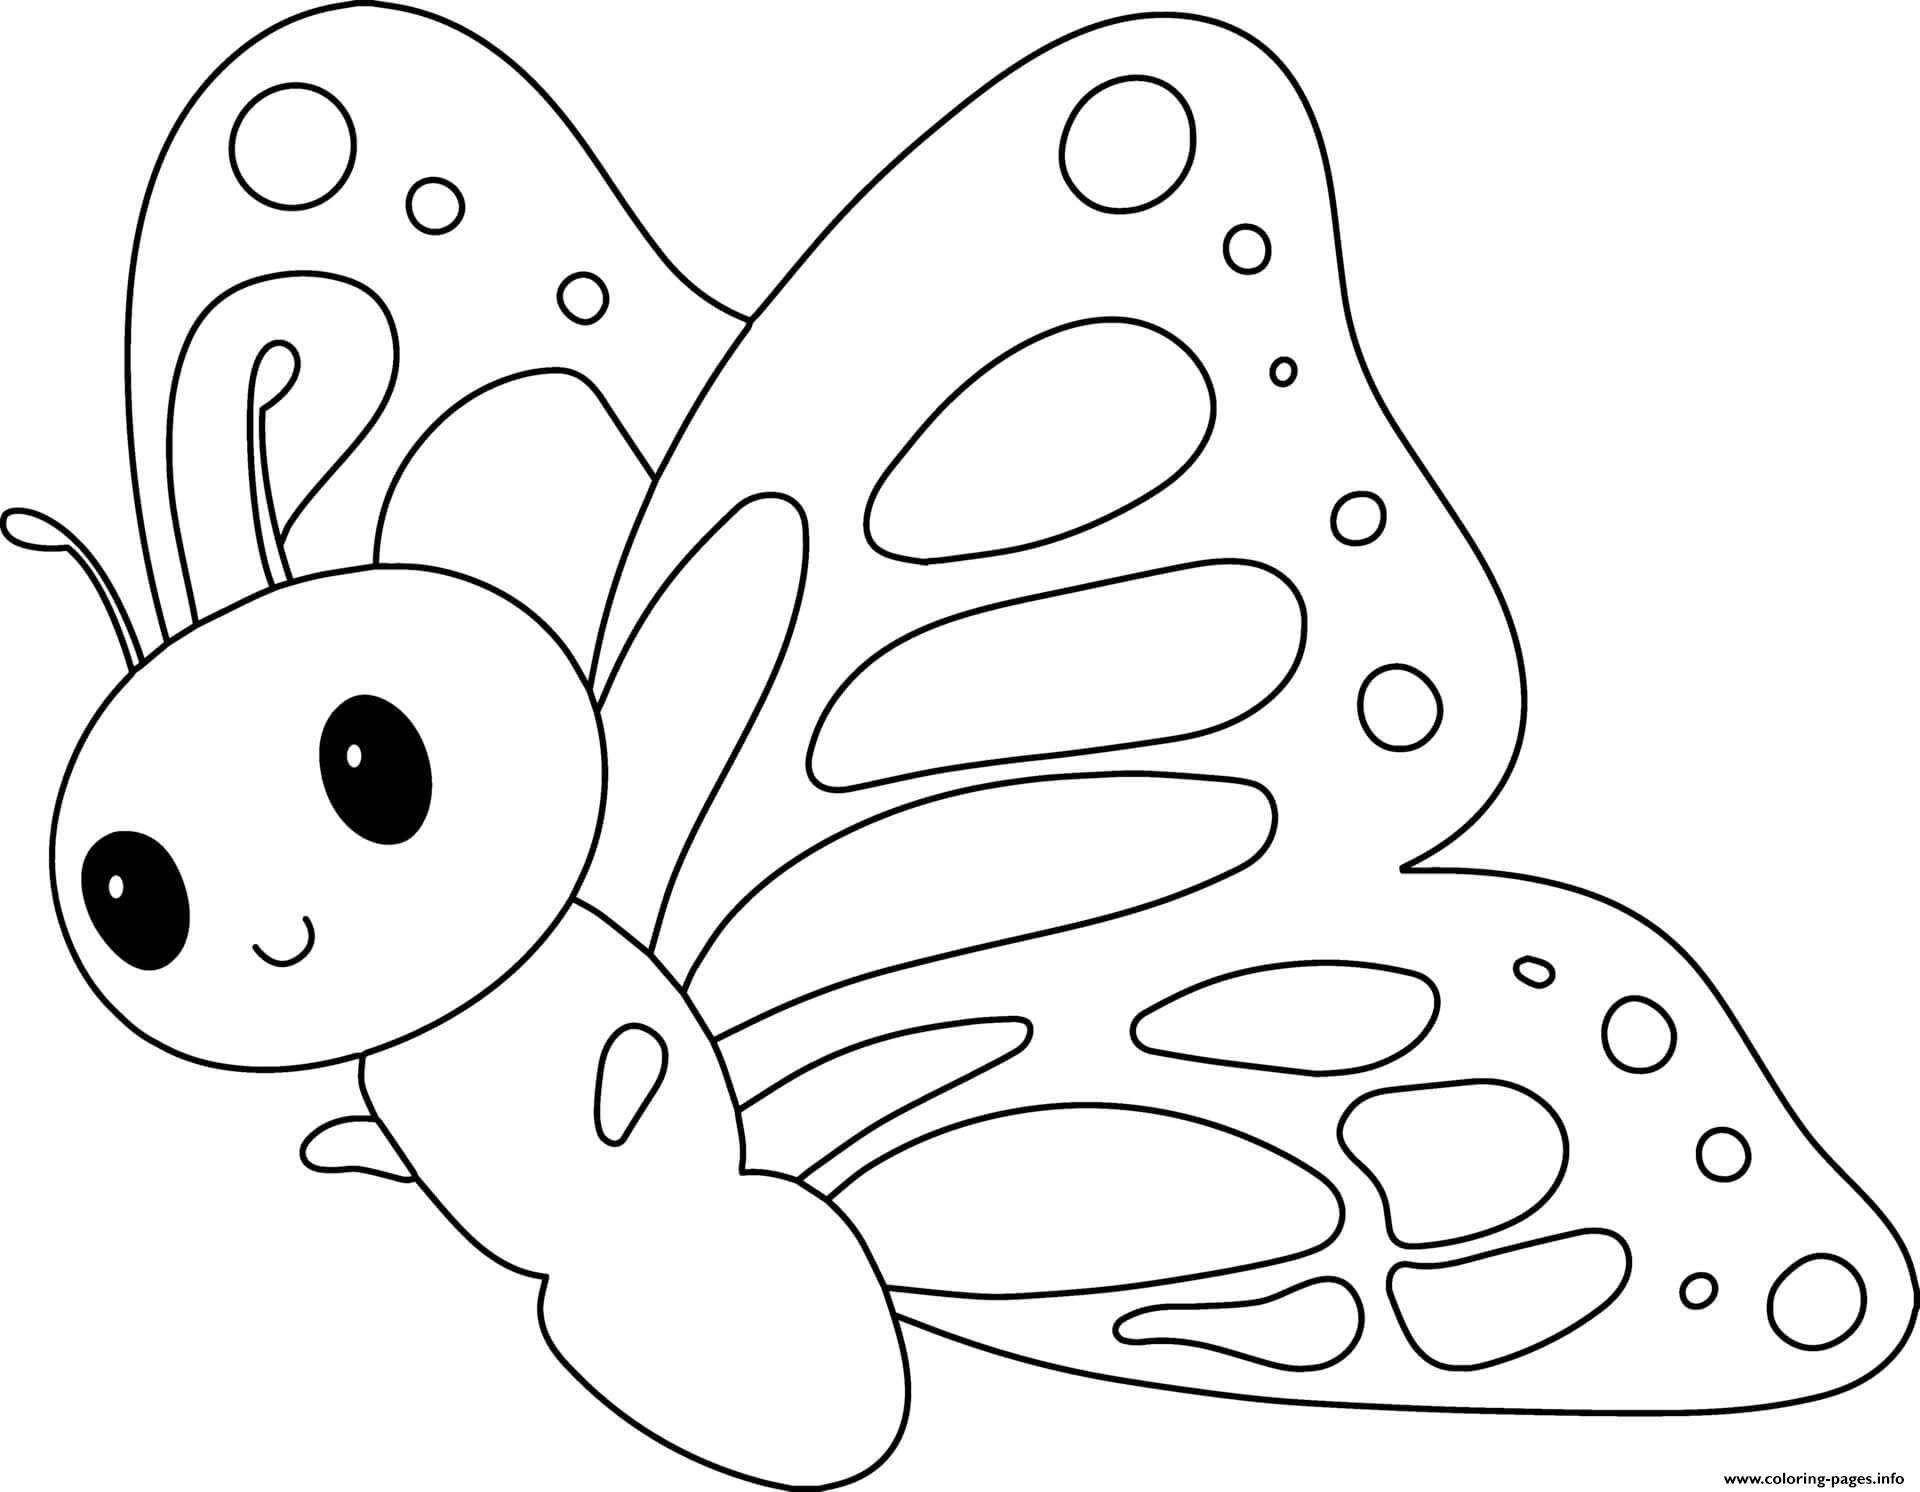 Butterfly coloring